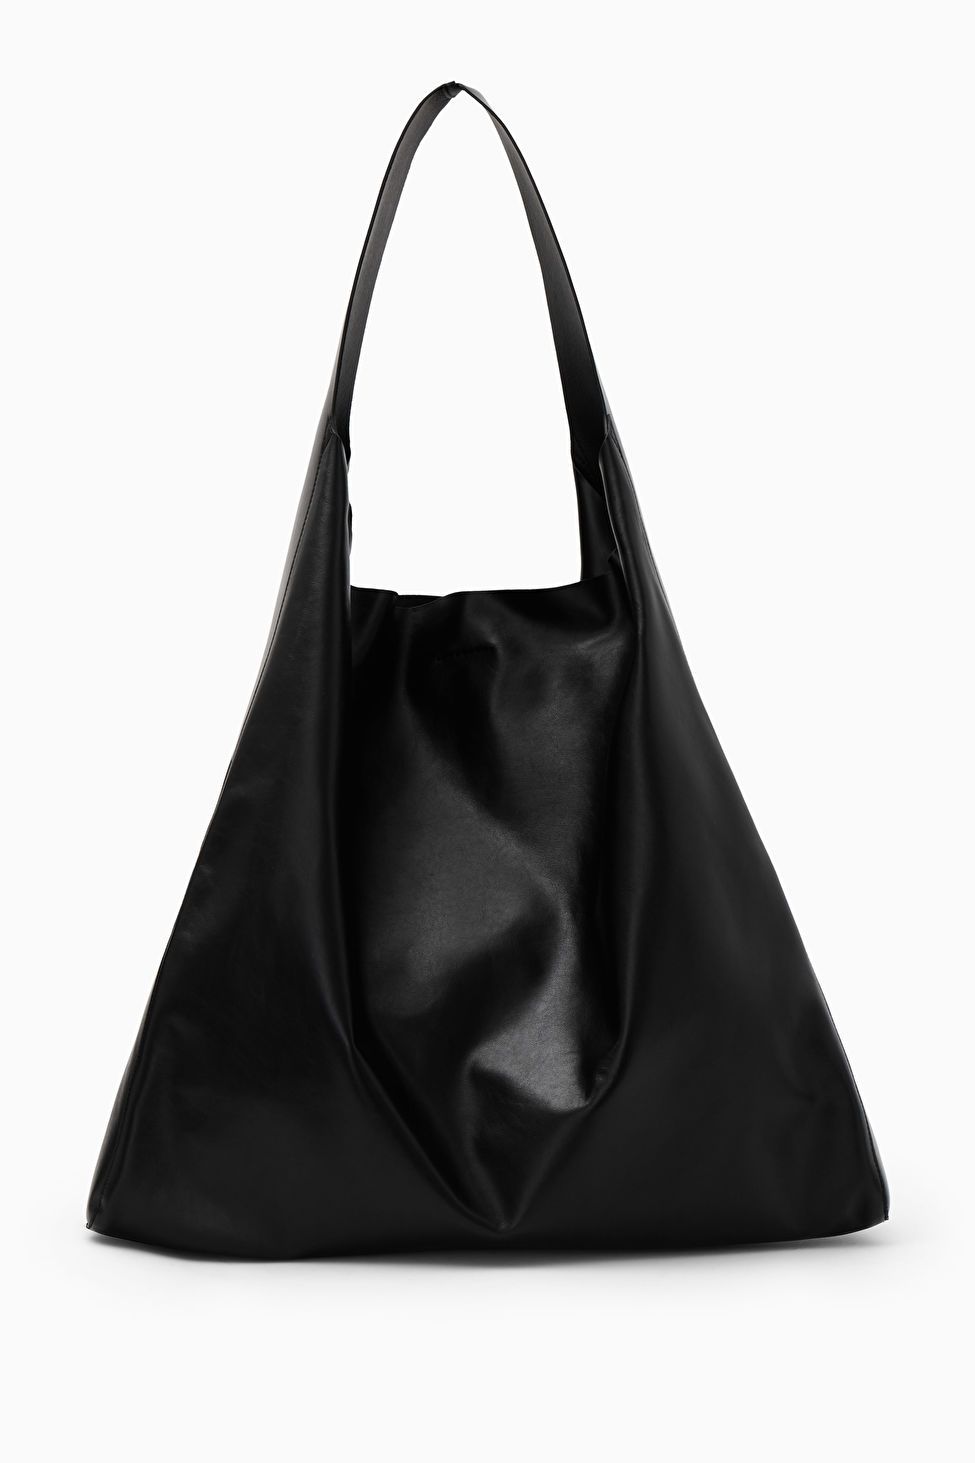 OVERSIZED SLOUCHY TOTE - LEATHER - BLACK - COS | COS UK